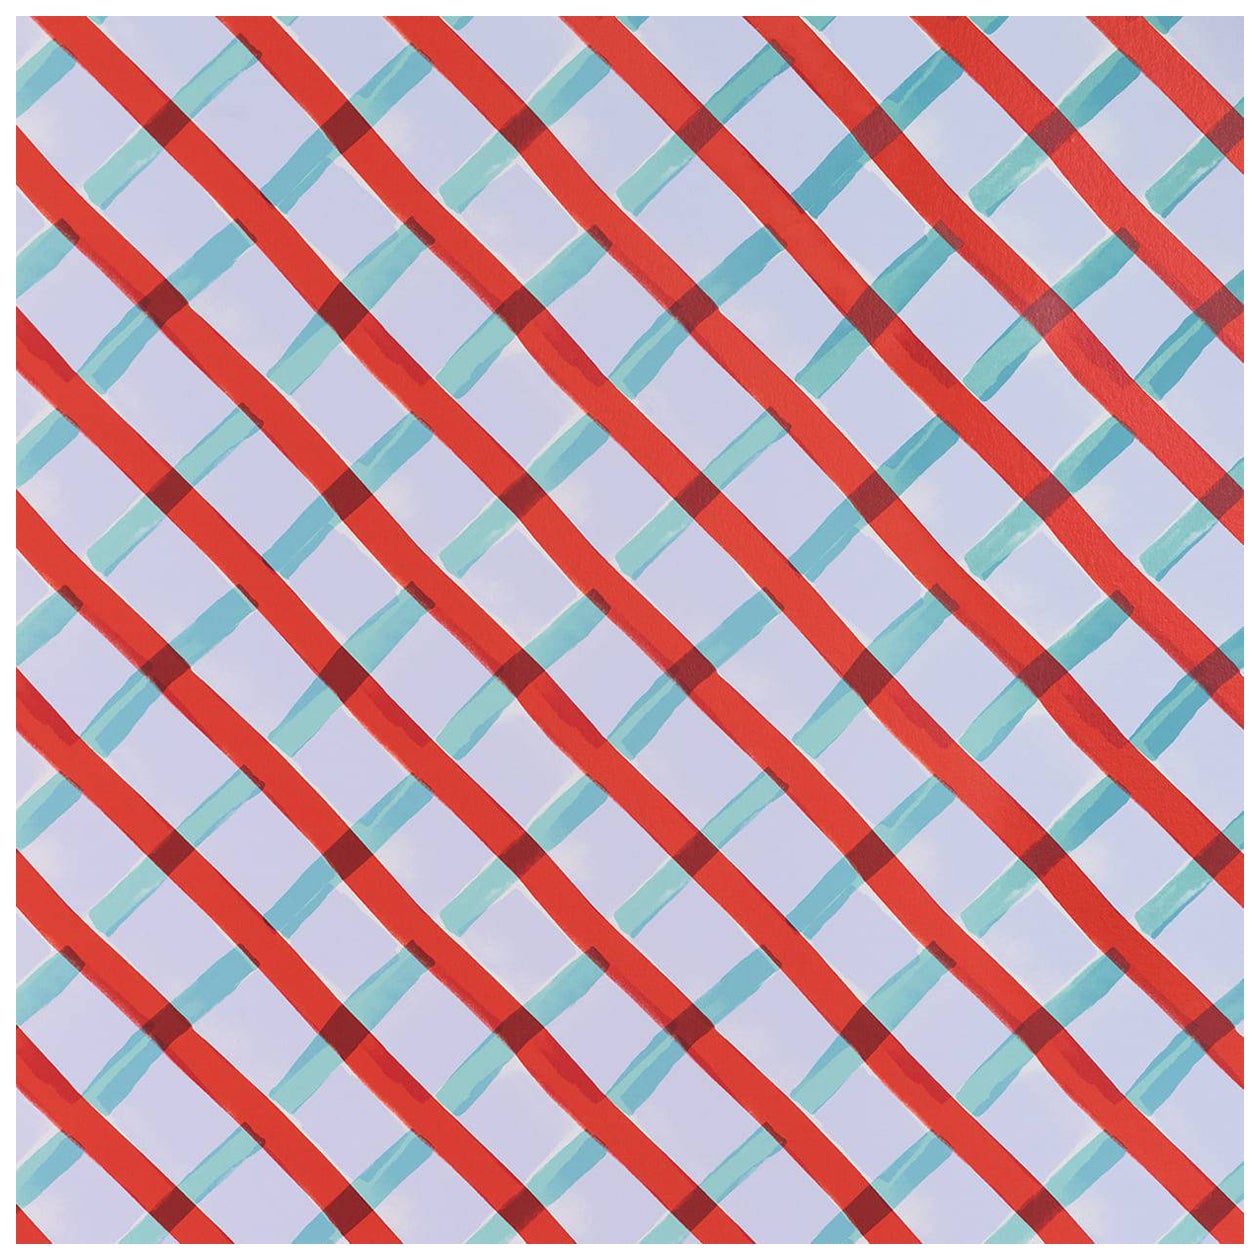 PETITE FRITURE Croisillon Wallpaper Red by Les Crafties